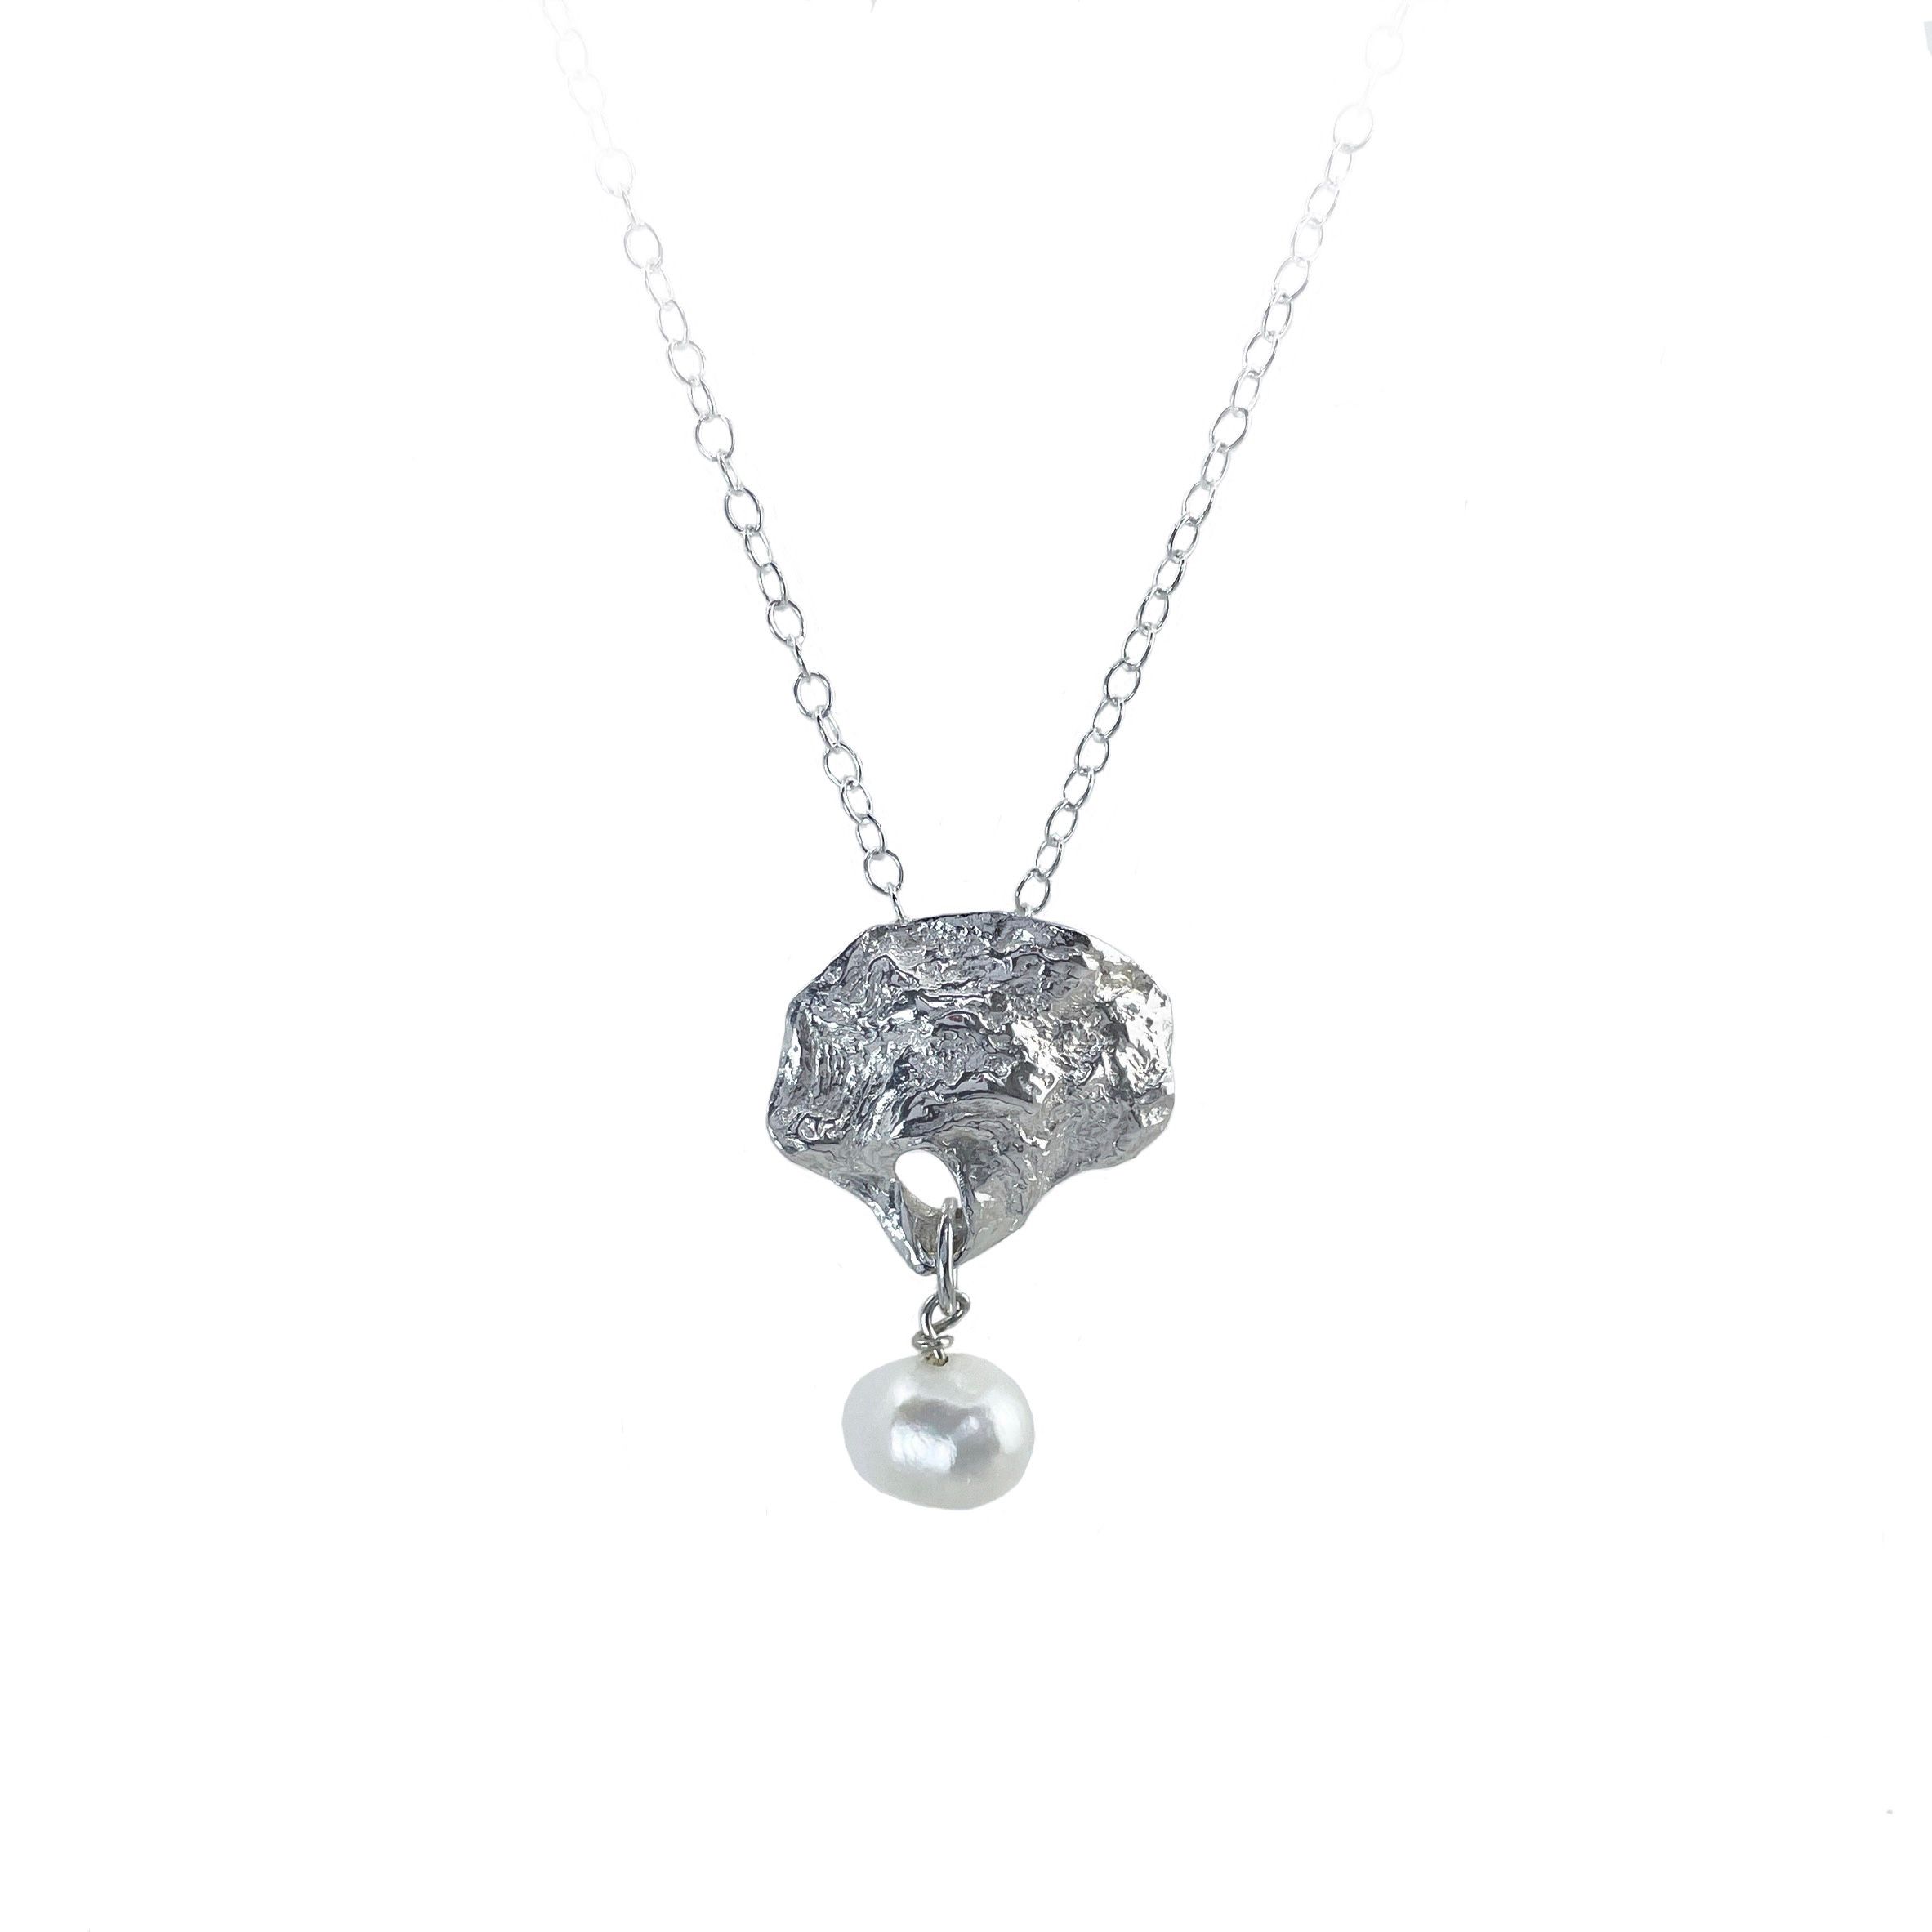 Silver oyster shell and pearl necklace